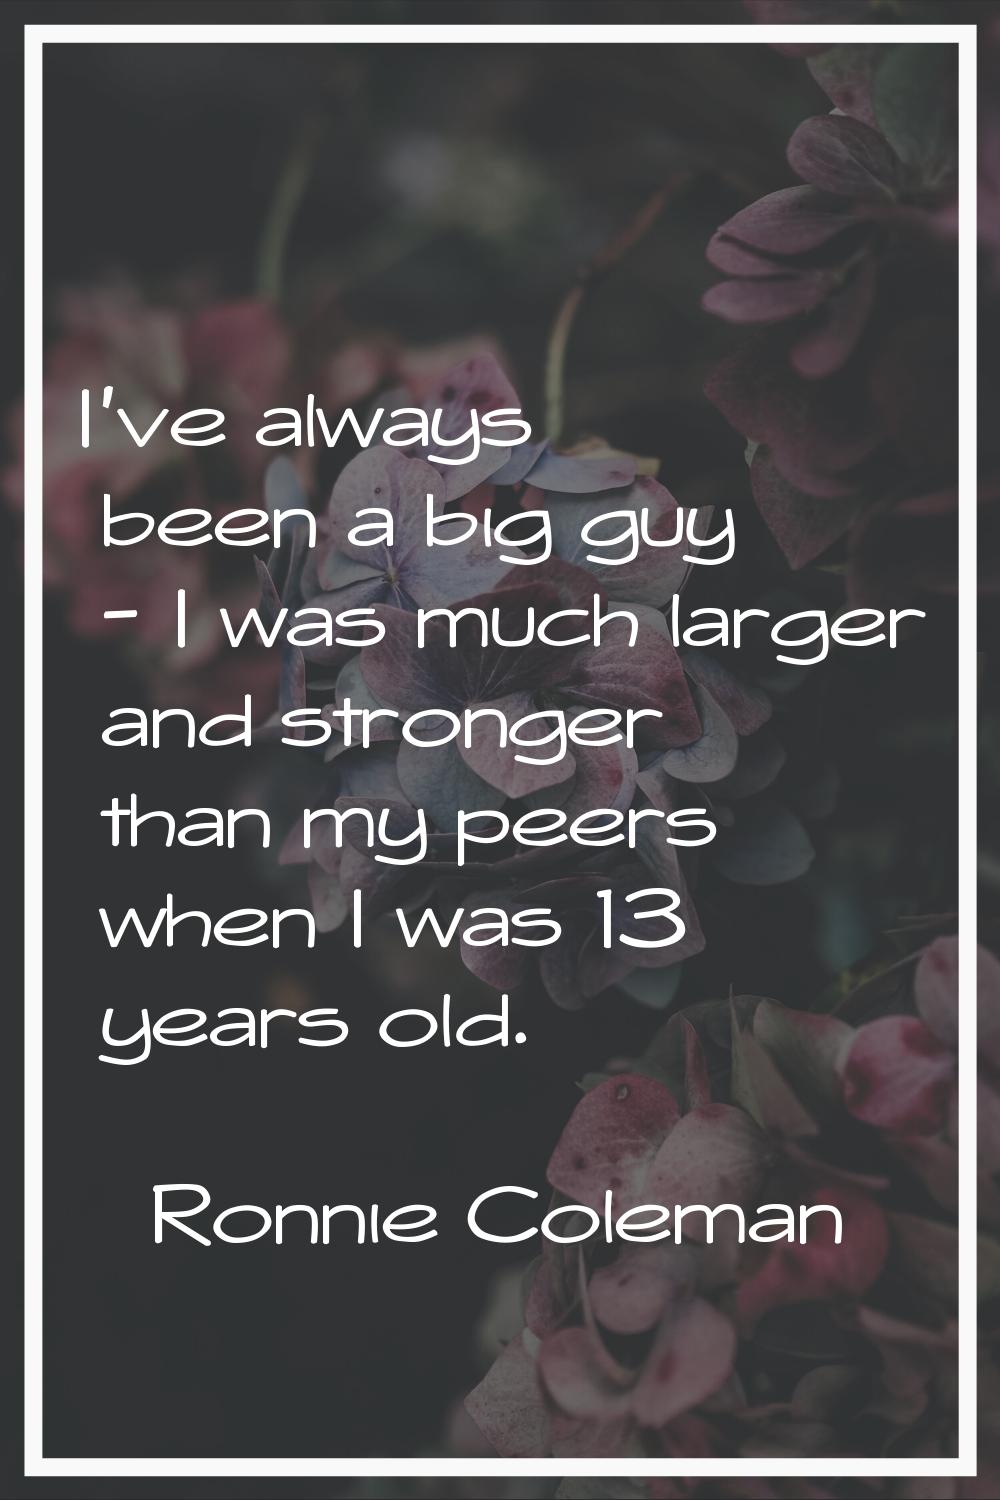 I've always been a big guy - I was much larger and stronger than my peers when I was 13 years old.